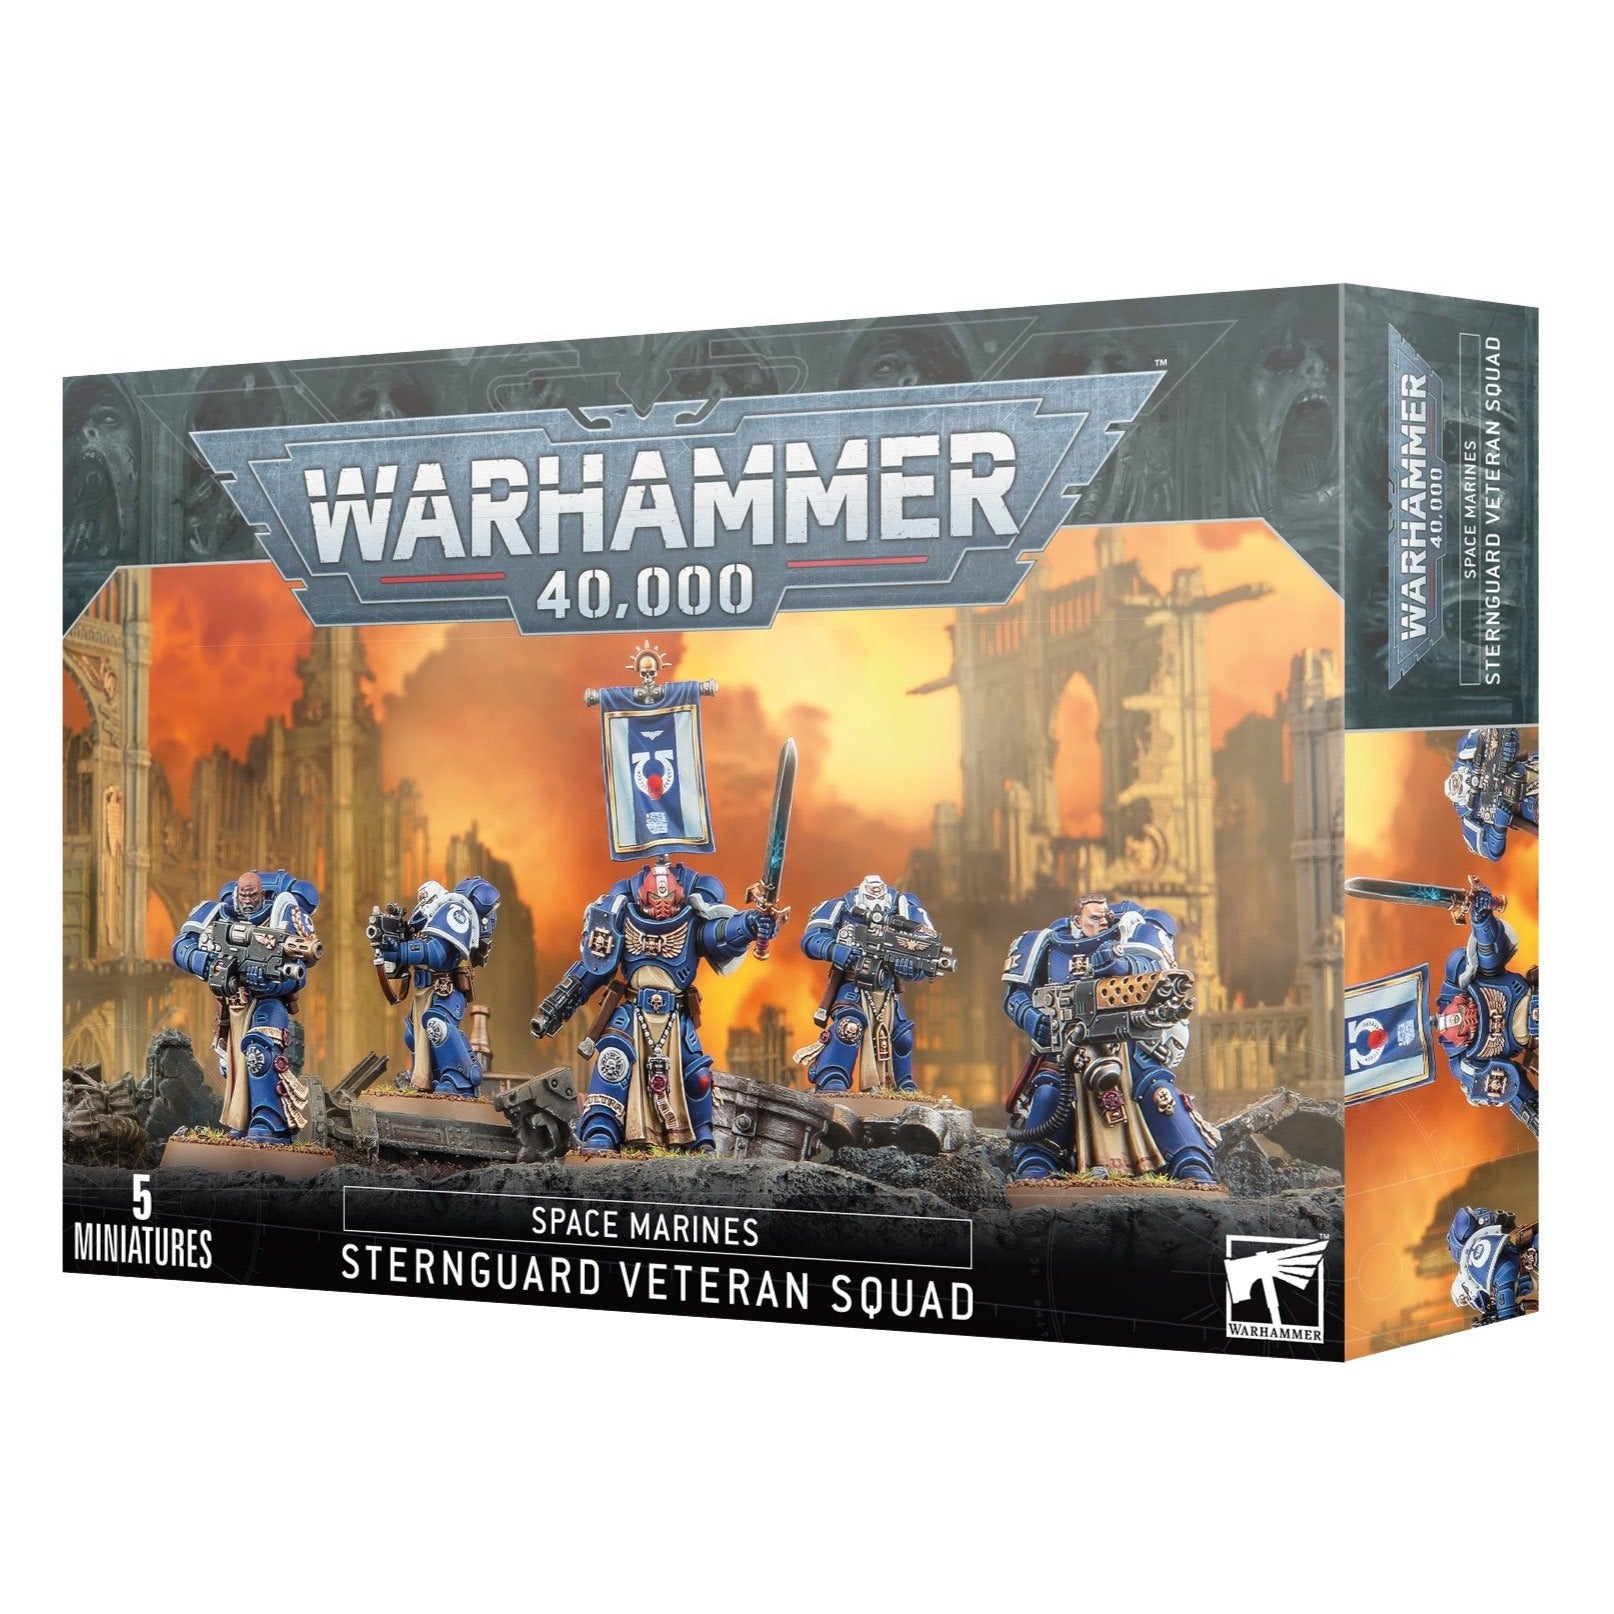 Space Marines: Sternguard Veteran Squad - Release Date 14/10/23 - Loaded Dice Barry Vale of Glamorgan CF64 3HD